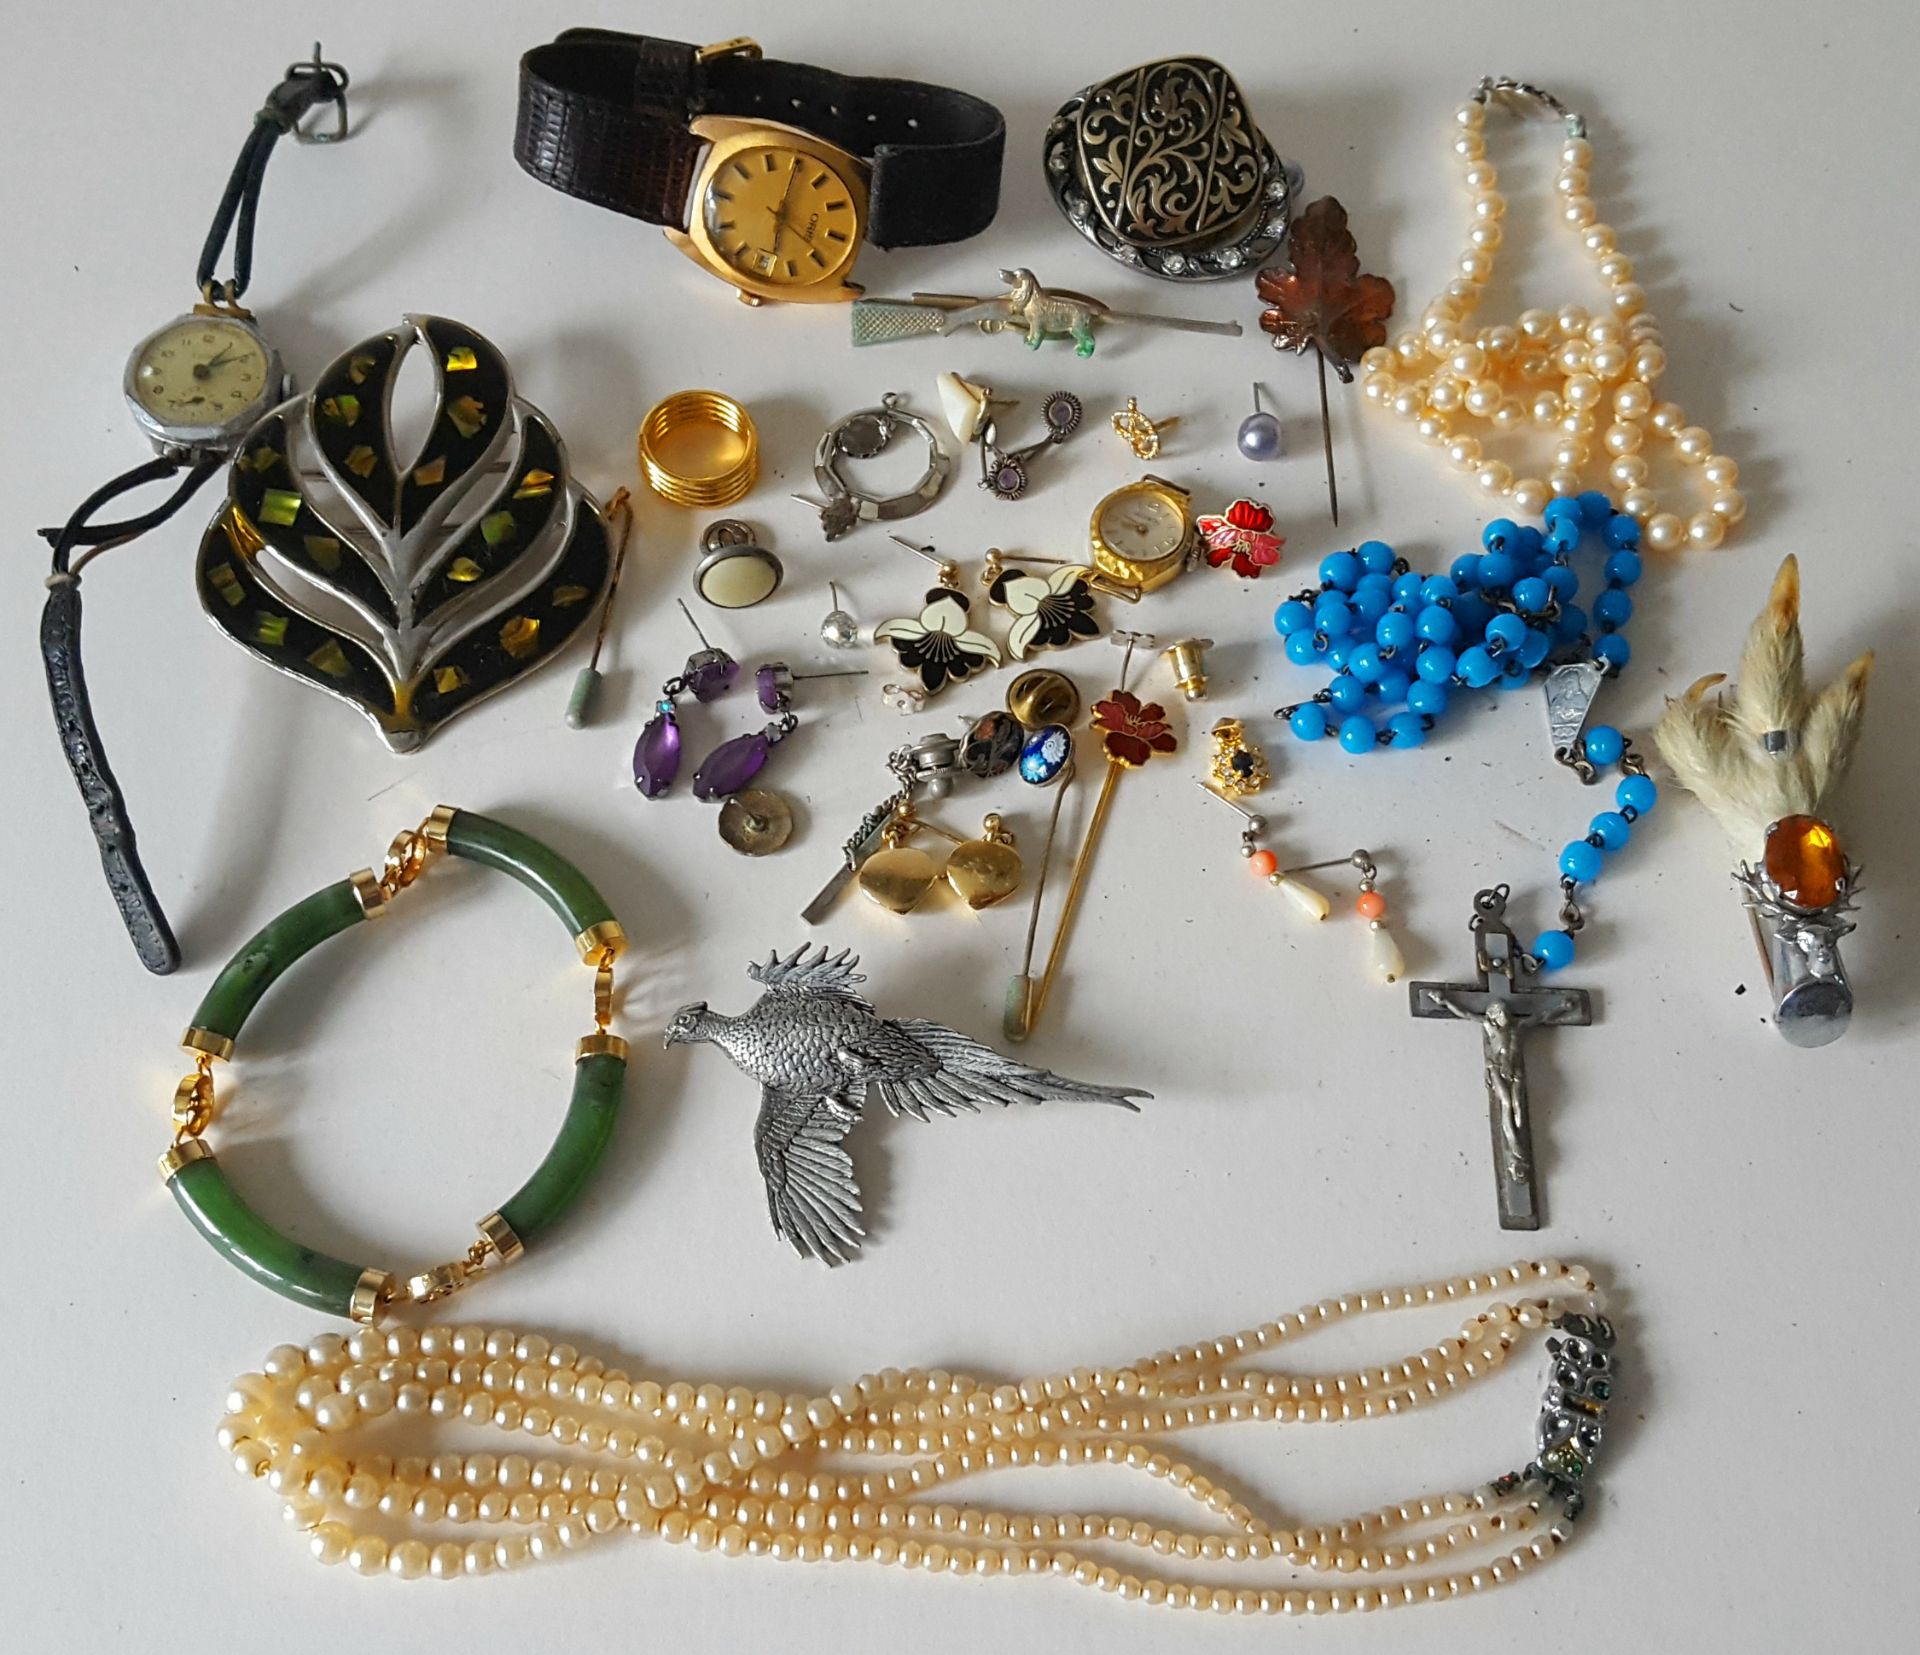 Vintage Retro Kitsch Parcel of Costume Jewellery Watches Brooches etc